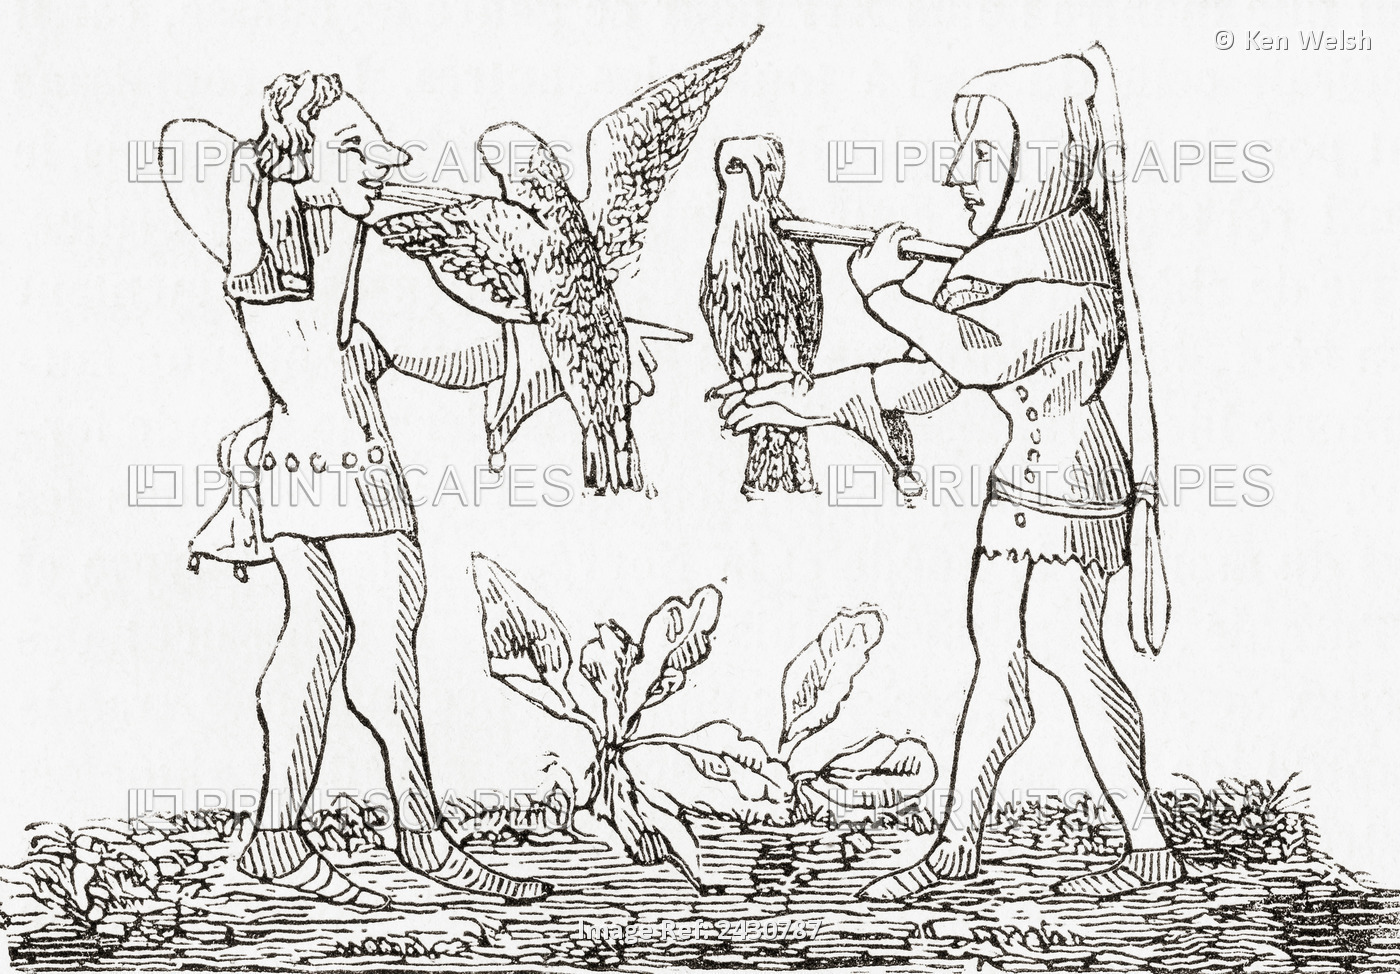 Falconry In The Middle Ages. From Le Magasin Pittoresque, Published 1843.